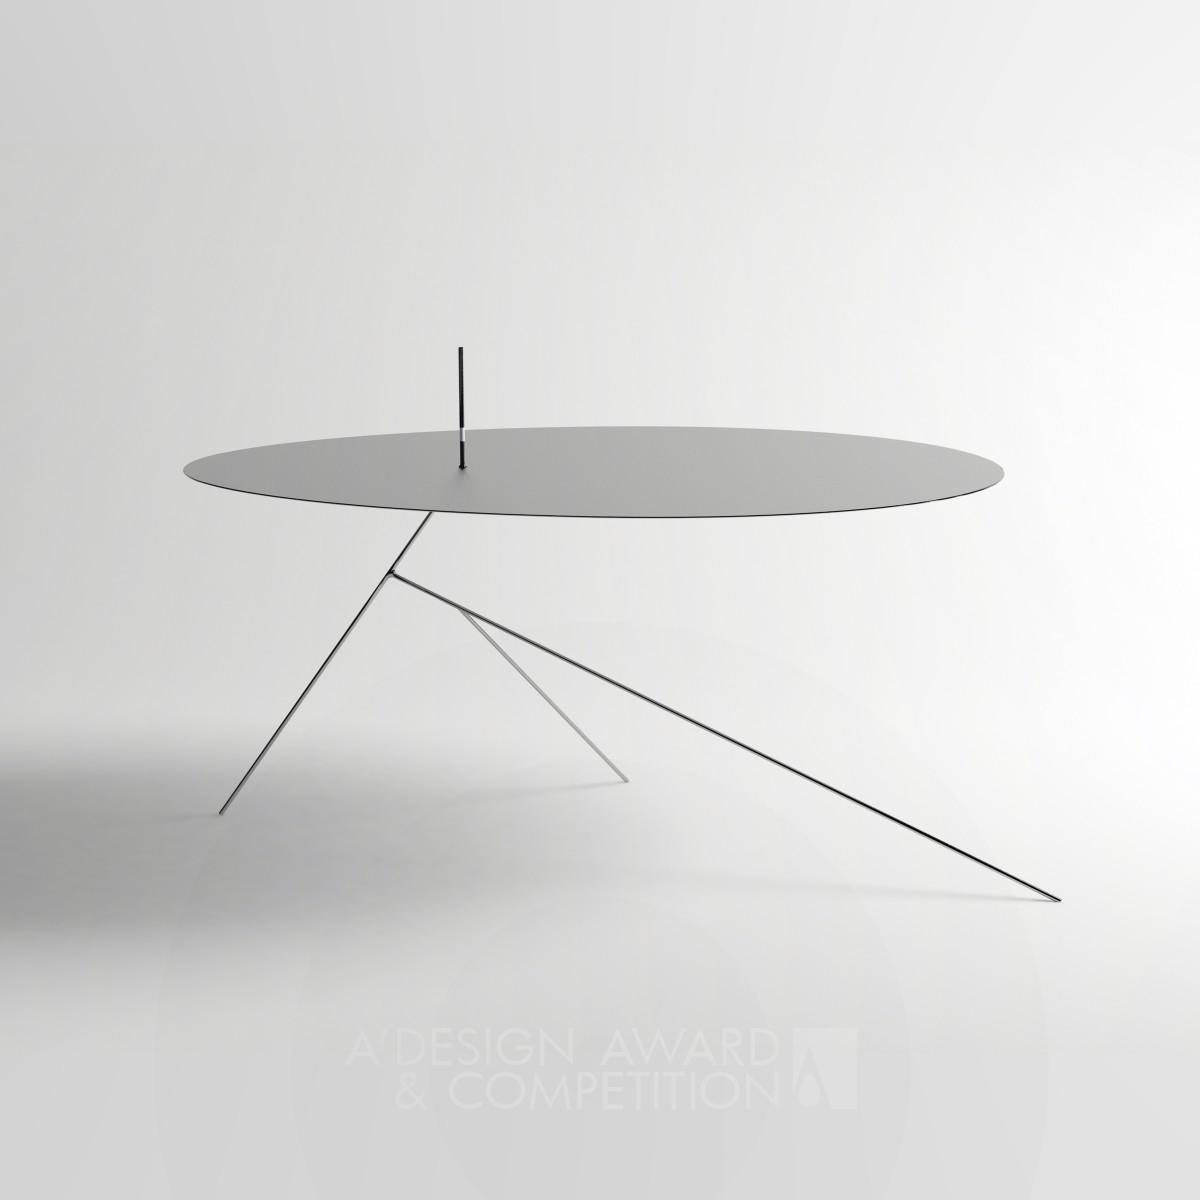 Chieut Table by Seungjun Jeong (Jay Deisgn)